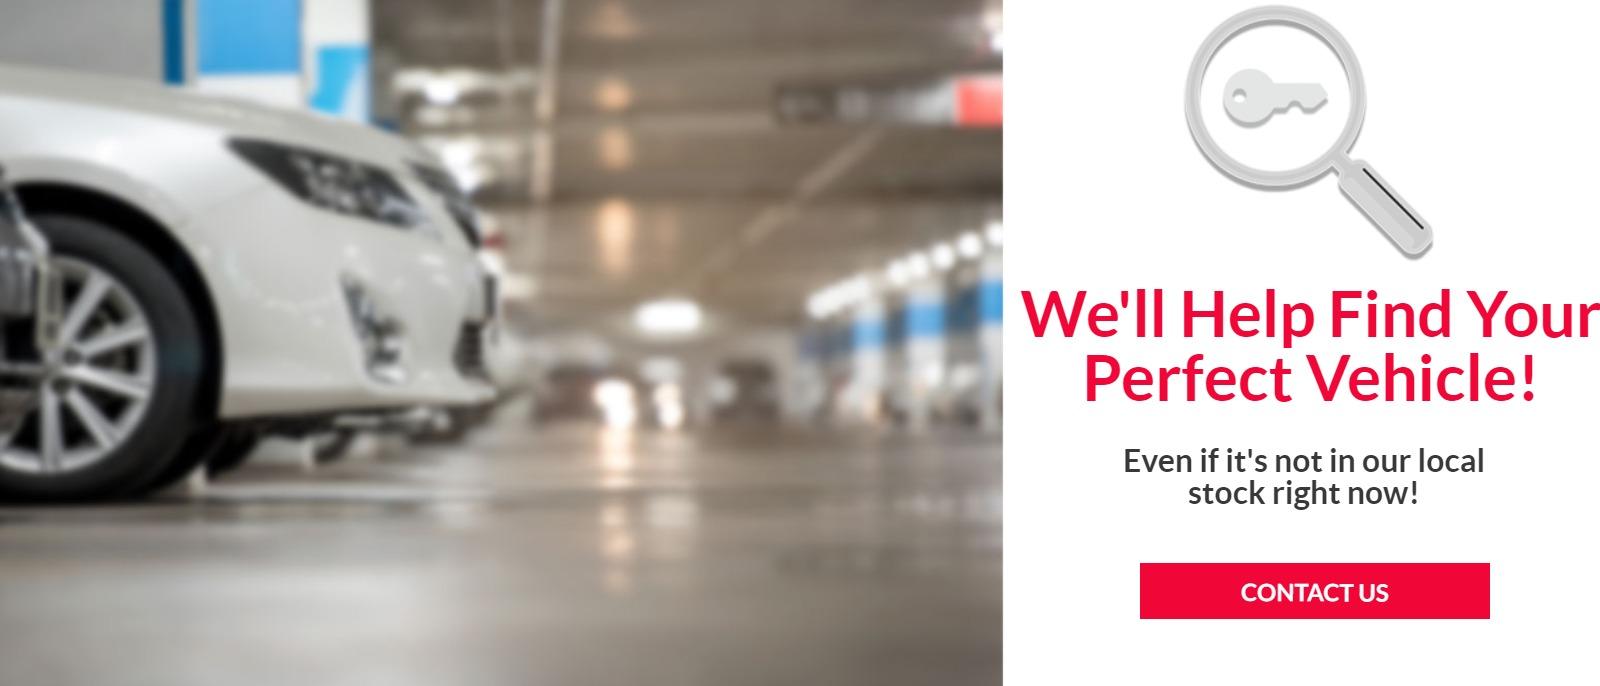 We'll Help find Your Perfect Vehicle! Even if it's not in our local stock right now!